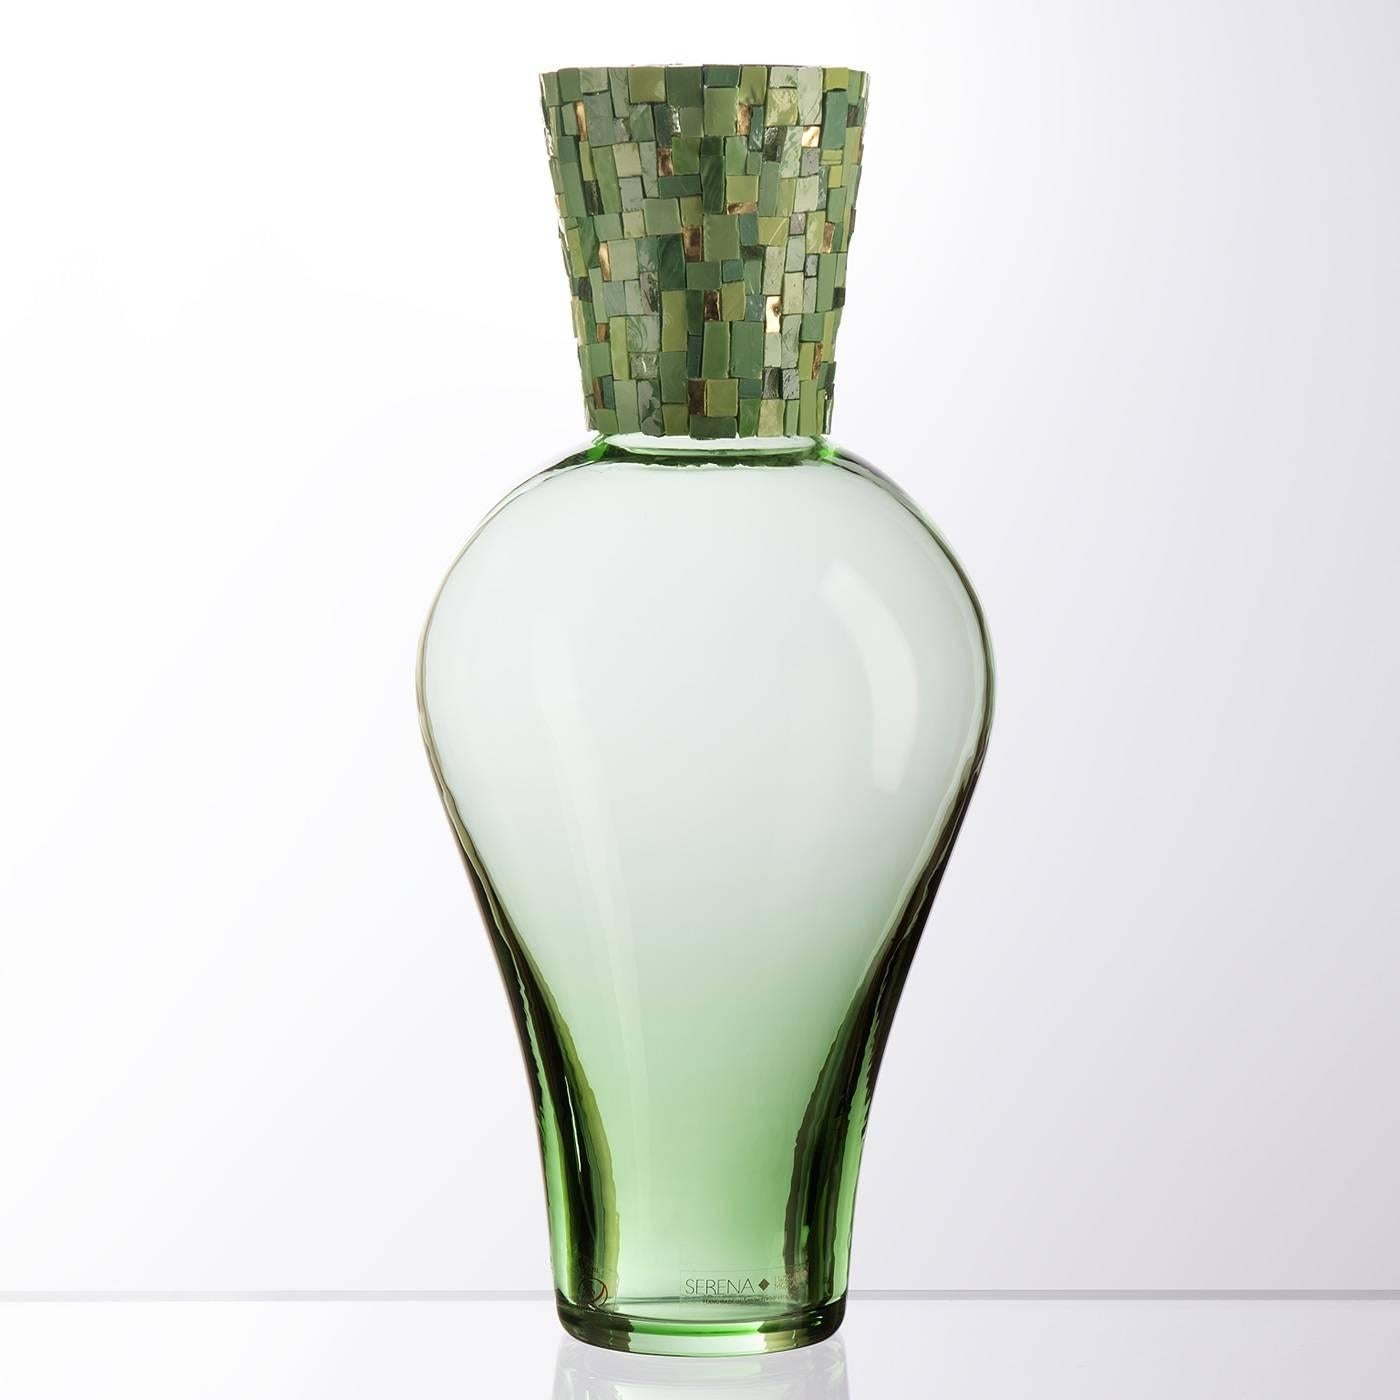 The tone-on-tone effect of the mosaic accents against the transparent sinuous body of this piece infuse a sense of rich elegance to this striking Amphora-shaped Murano green mouth-blown glass with a striking mosaic of tesserae made of gold foil and